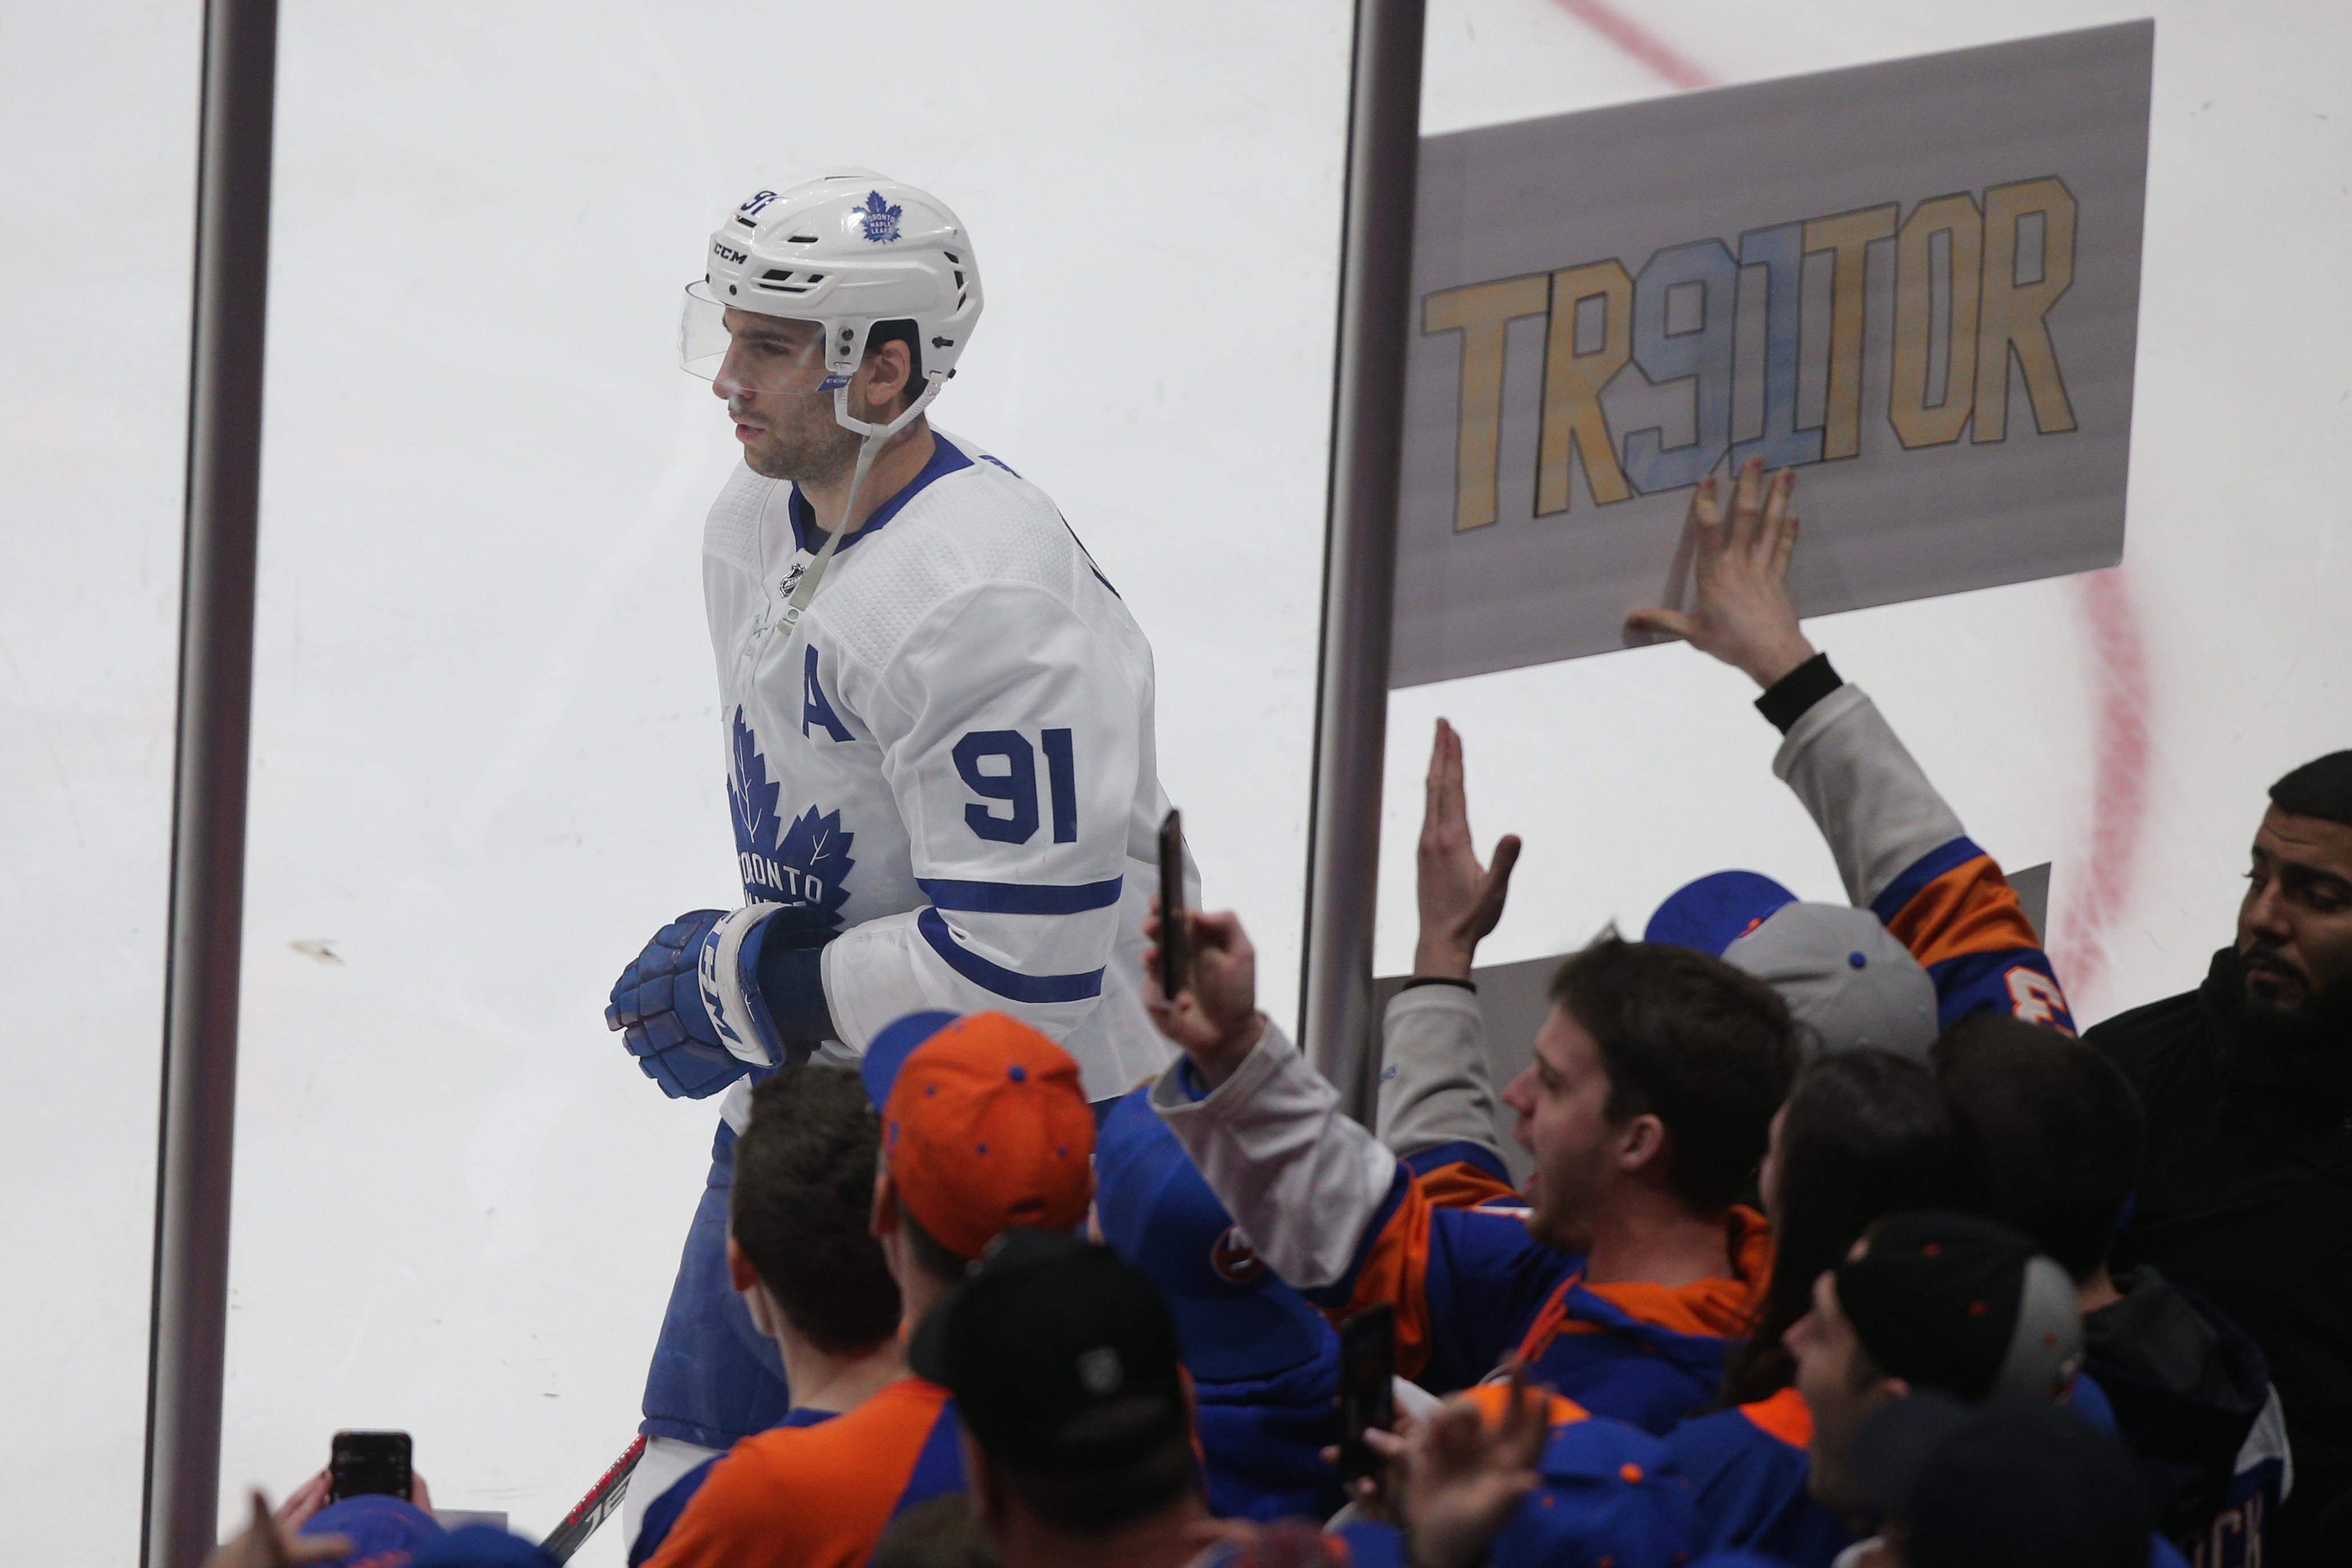 Feb 28, 2019; Brooklyn, NY, USA; Toronto Maple Leafs center John Tavares (91) skates past a sign held by a fan of the New York Islanders during warm ups before a game at the Nassau Veterans Memorial Coliseum. Mandatory Credit: Brad Penner-USA TODAY Sports